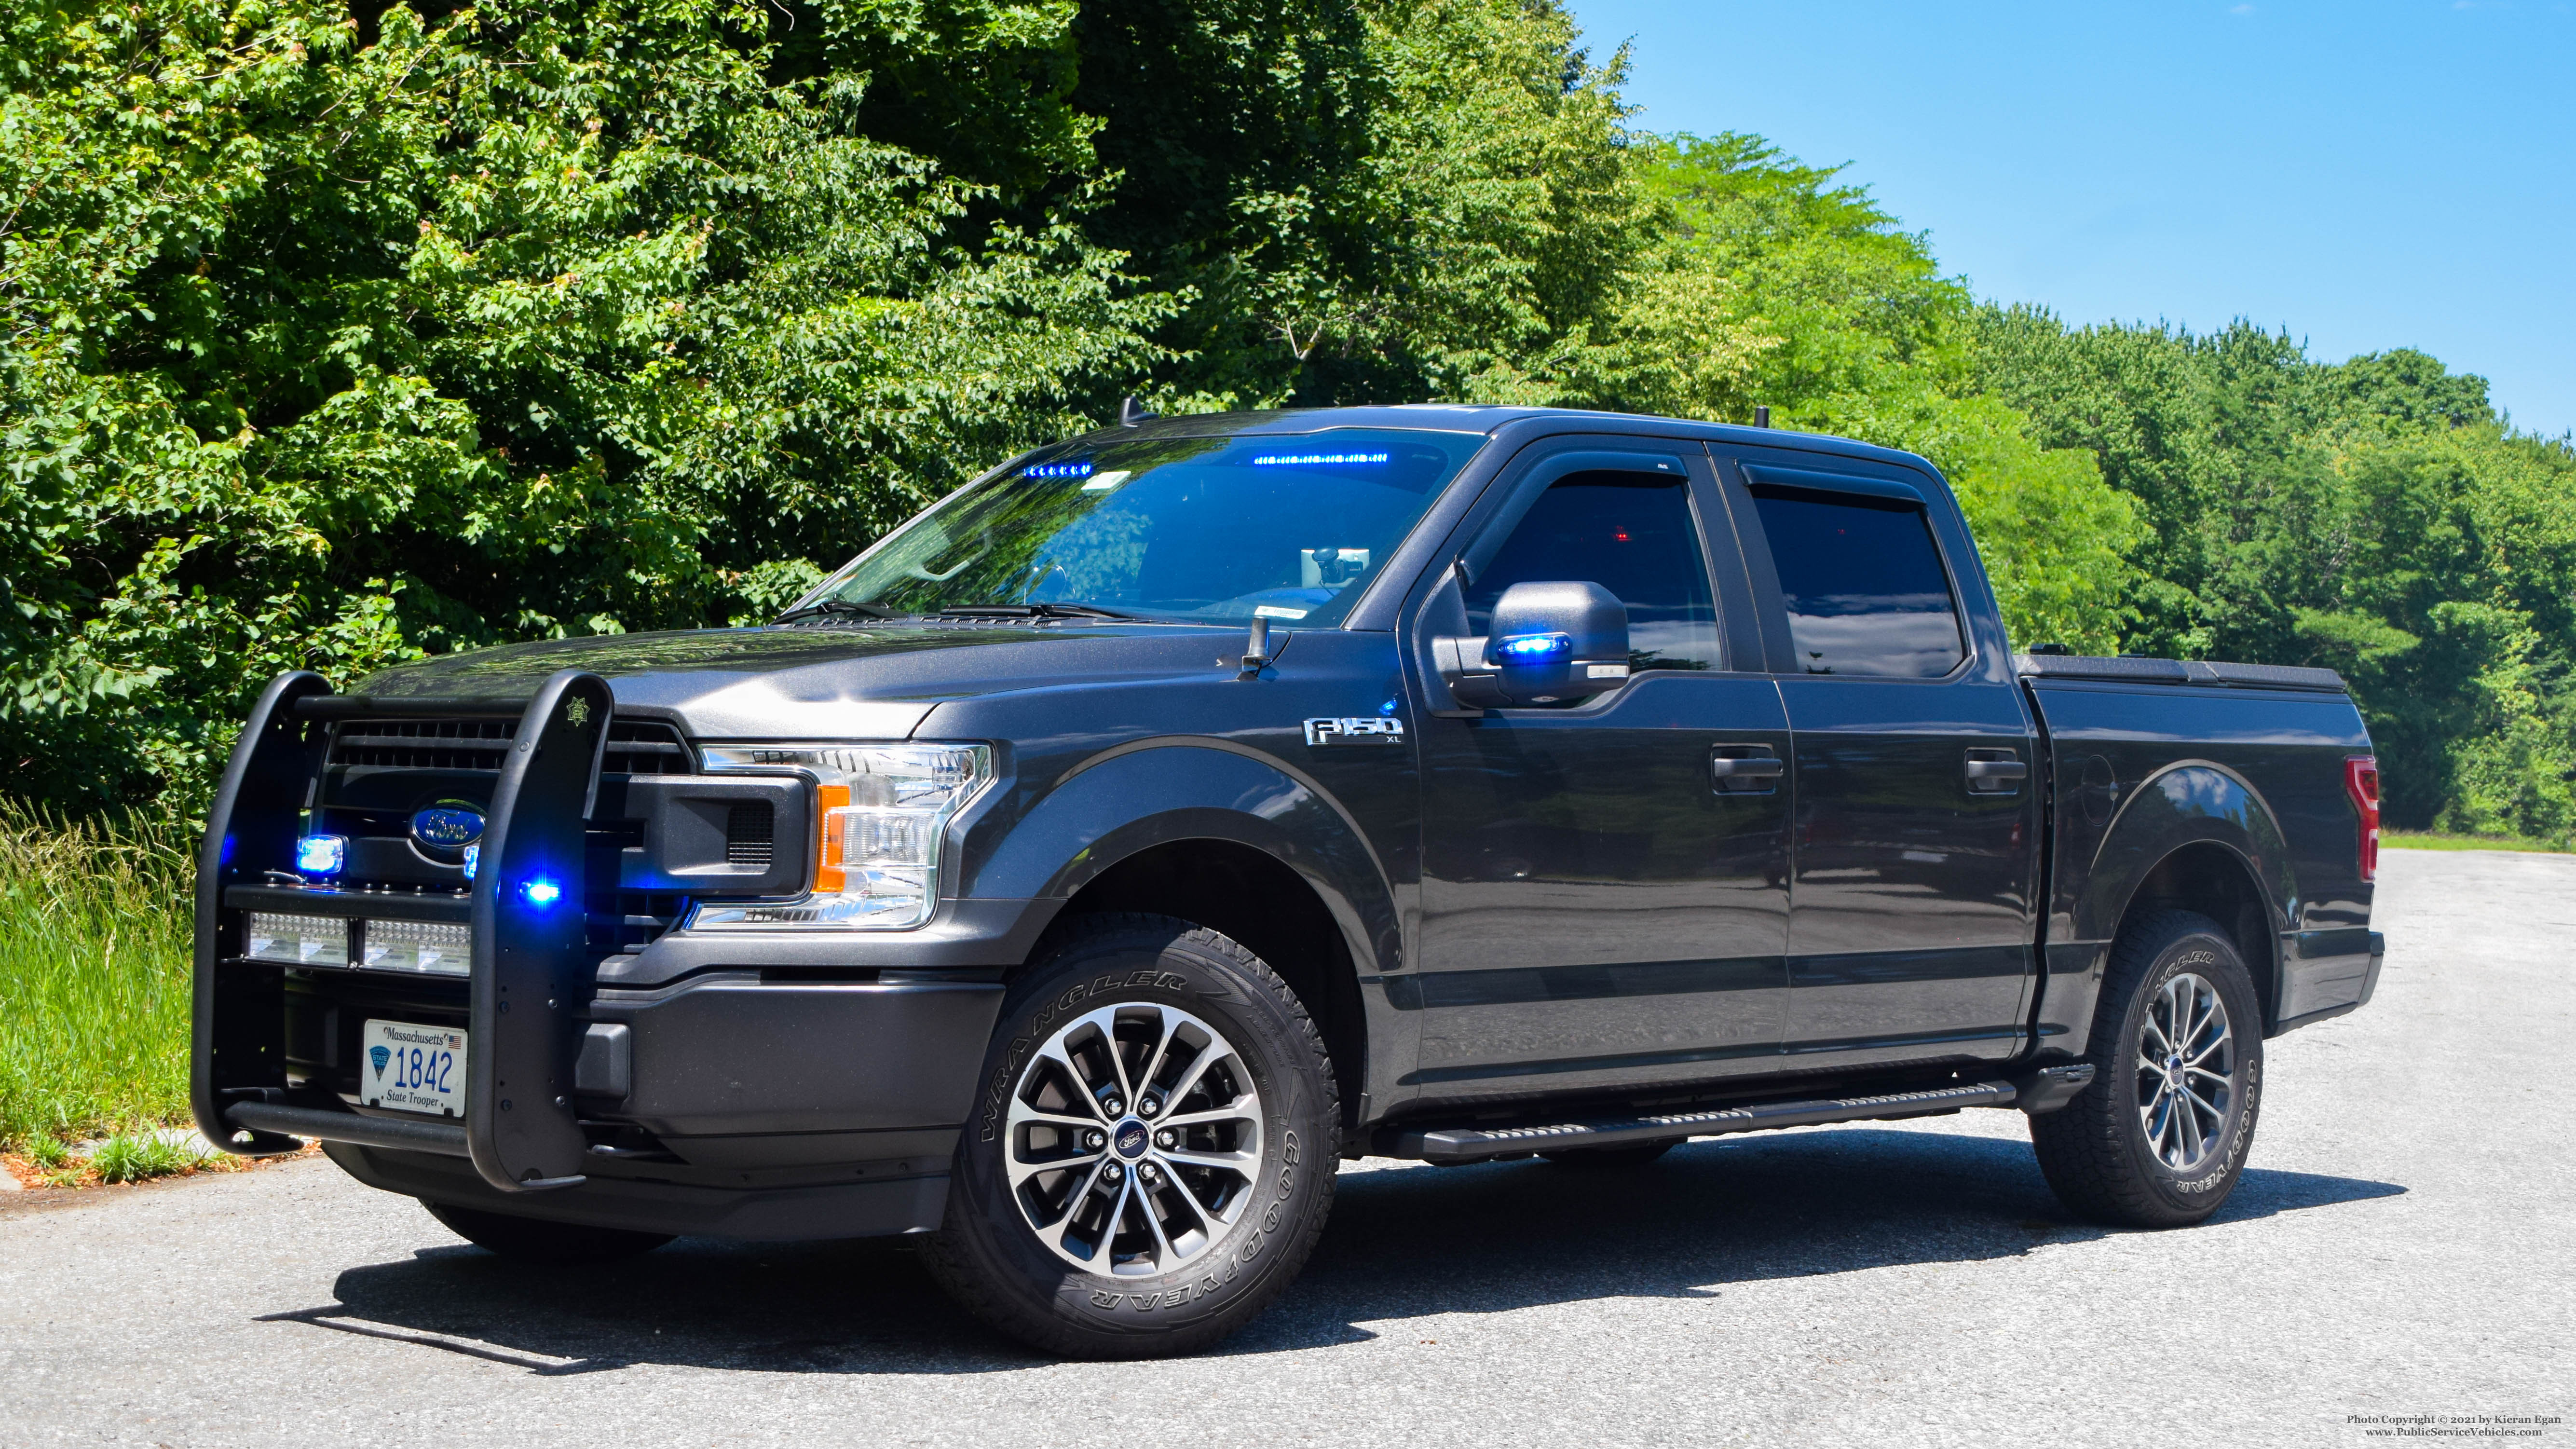 A photo  of Massachusetts State Police
            Cruiser 1842T, a 2020 Ford F-150 Police Responder             taken by Kieran Egan